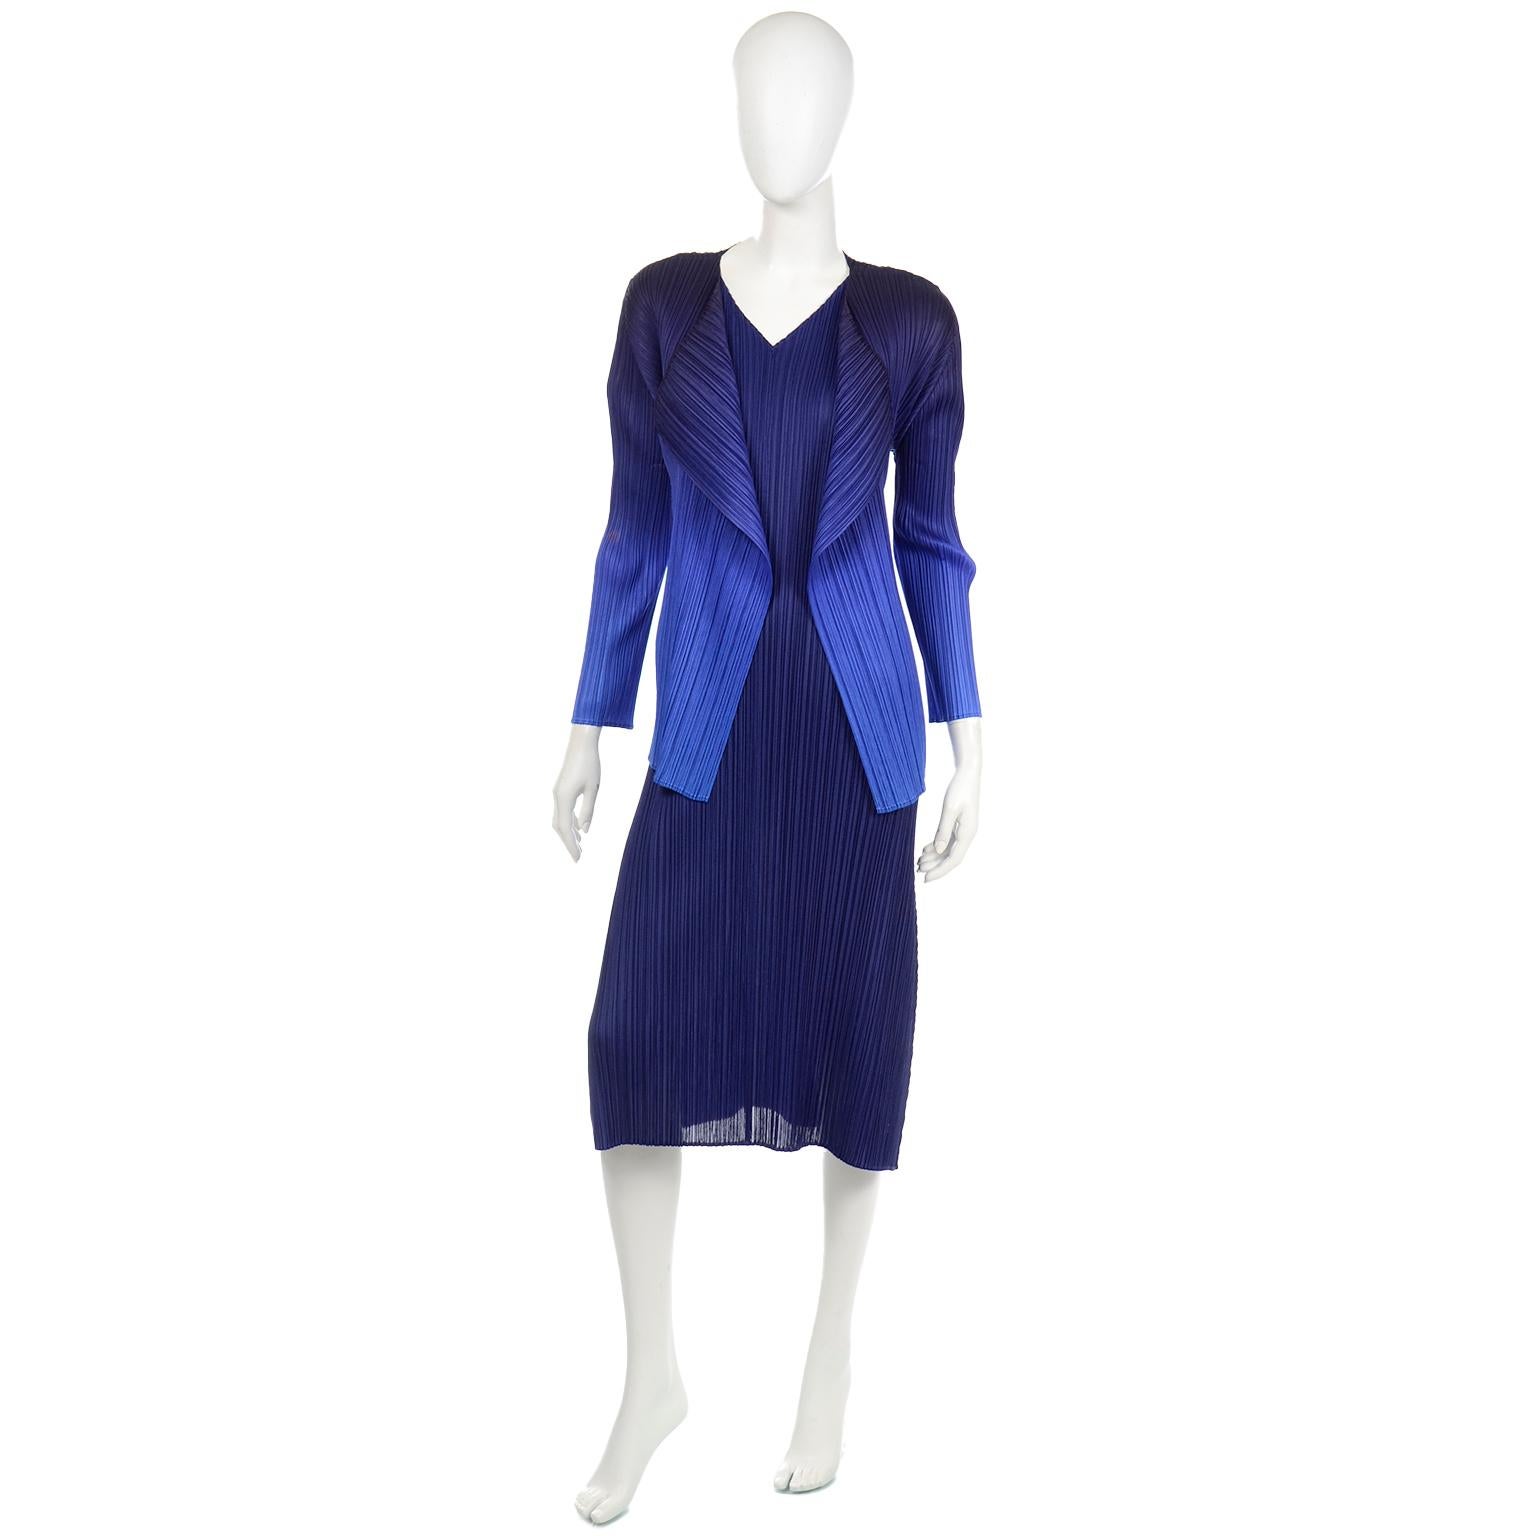 This is a sensational Issey Miyake Pleats Please indigo blue dress and ombré jacket ensemble. This stunning dress has a v-neck front with cinched shoulders that are completely adjustable by a knotted robe. The sleeves are slightly pointed at the